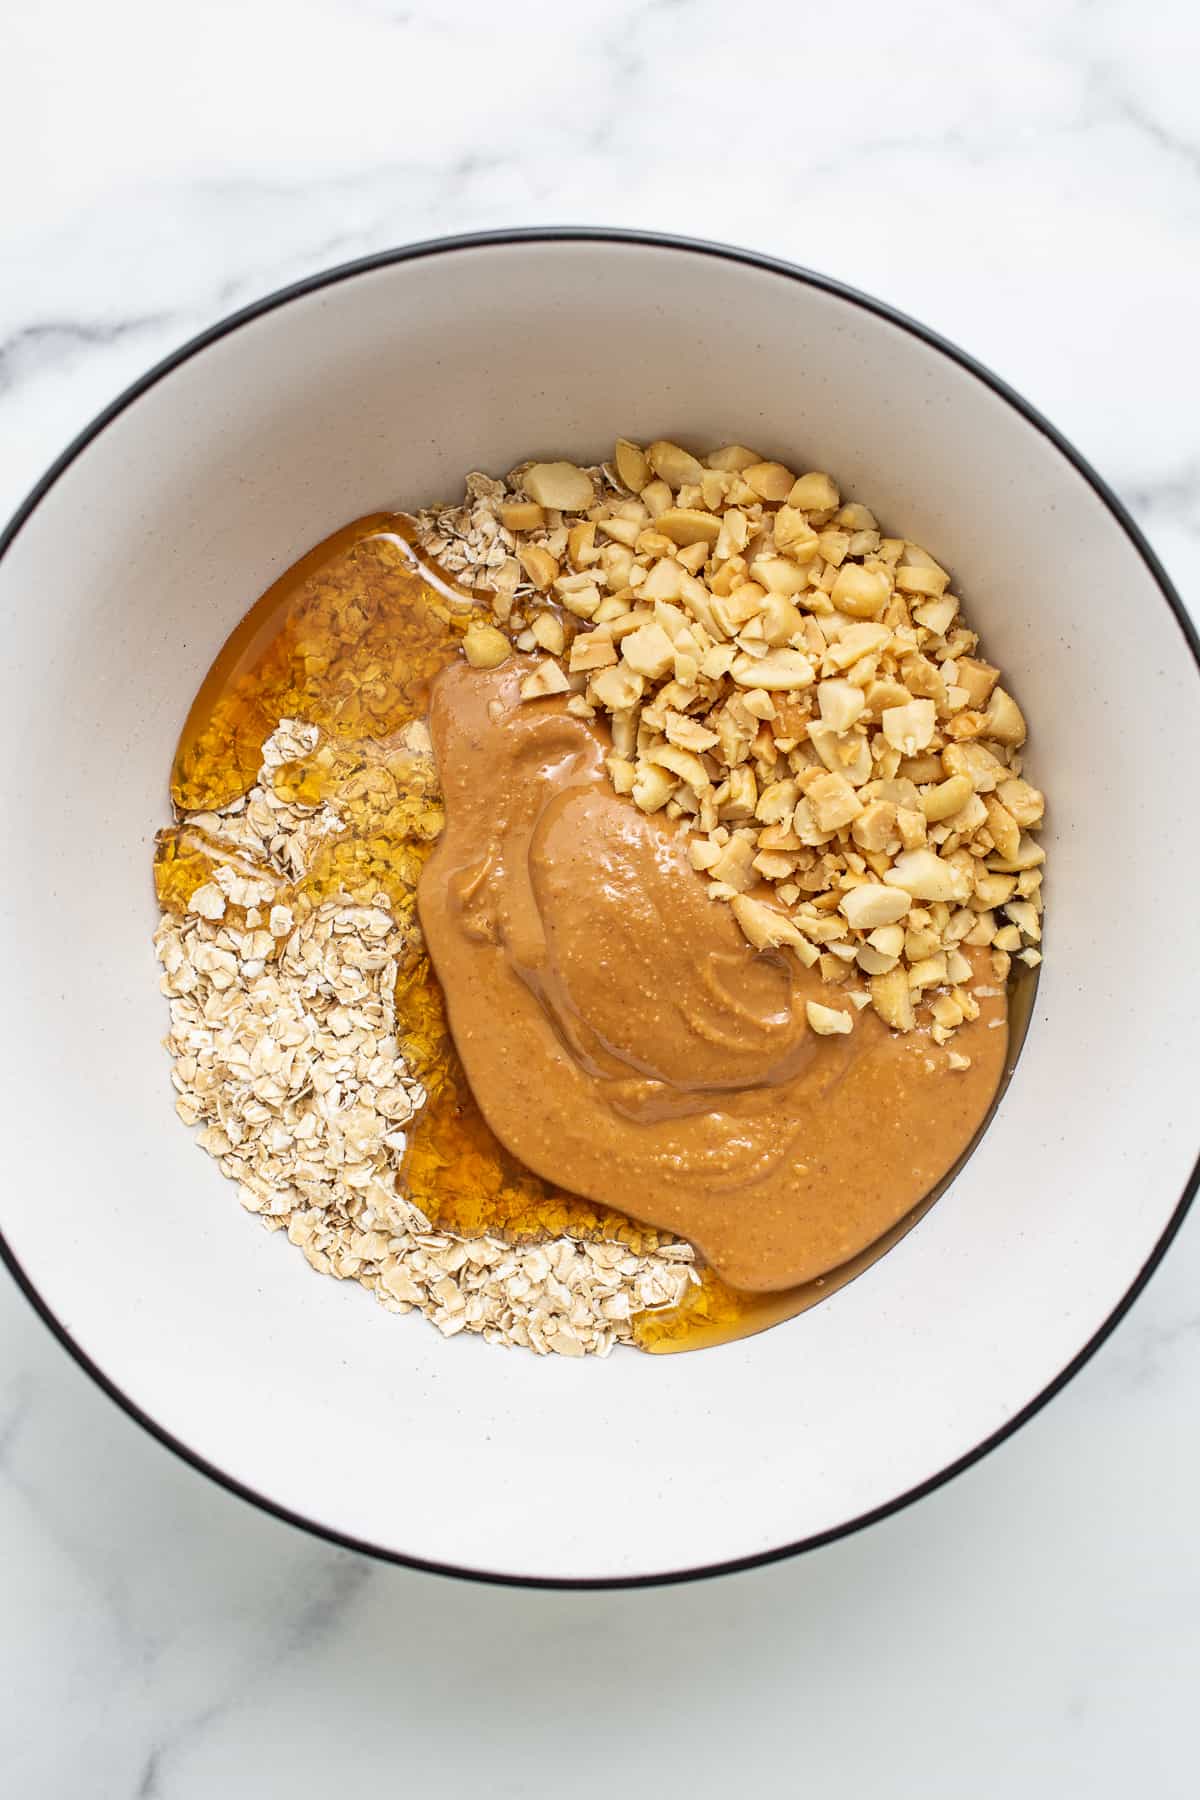 oats, honey, peanut butter, and peanuts in bowl.